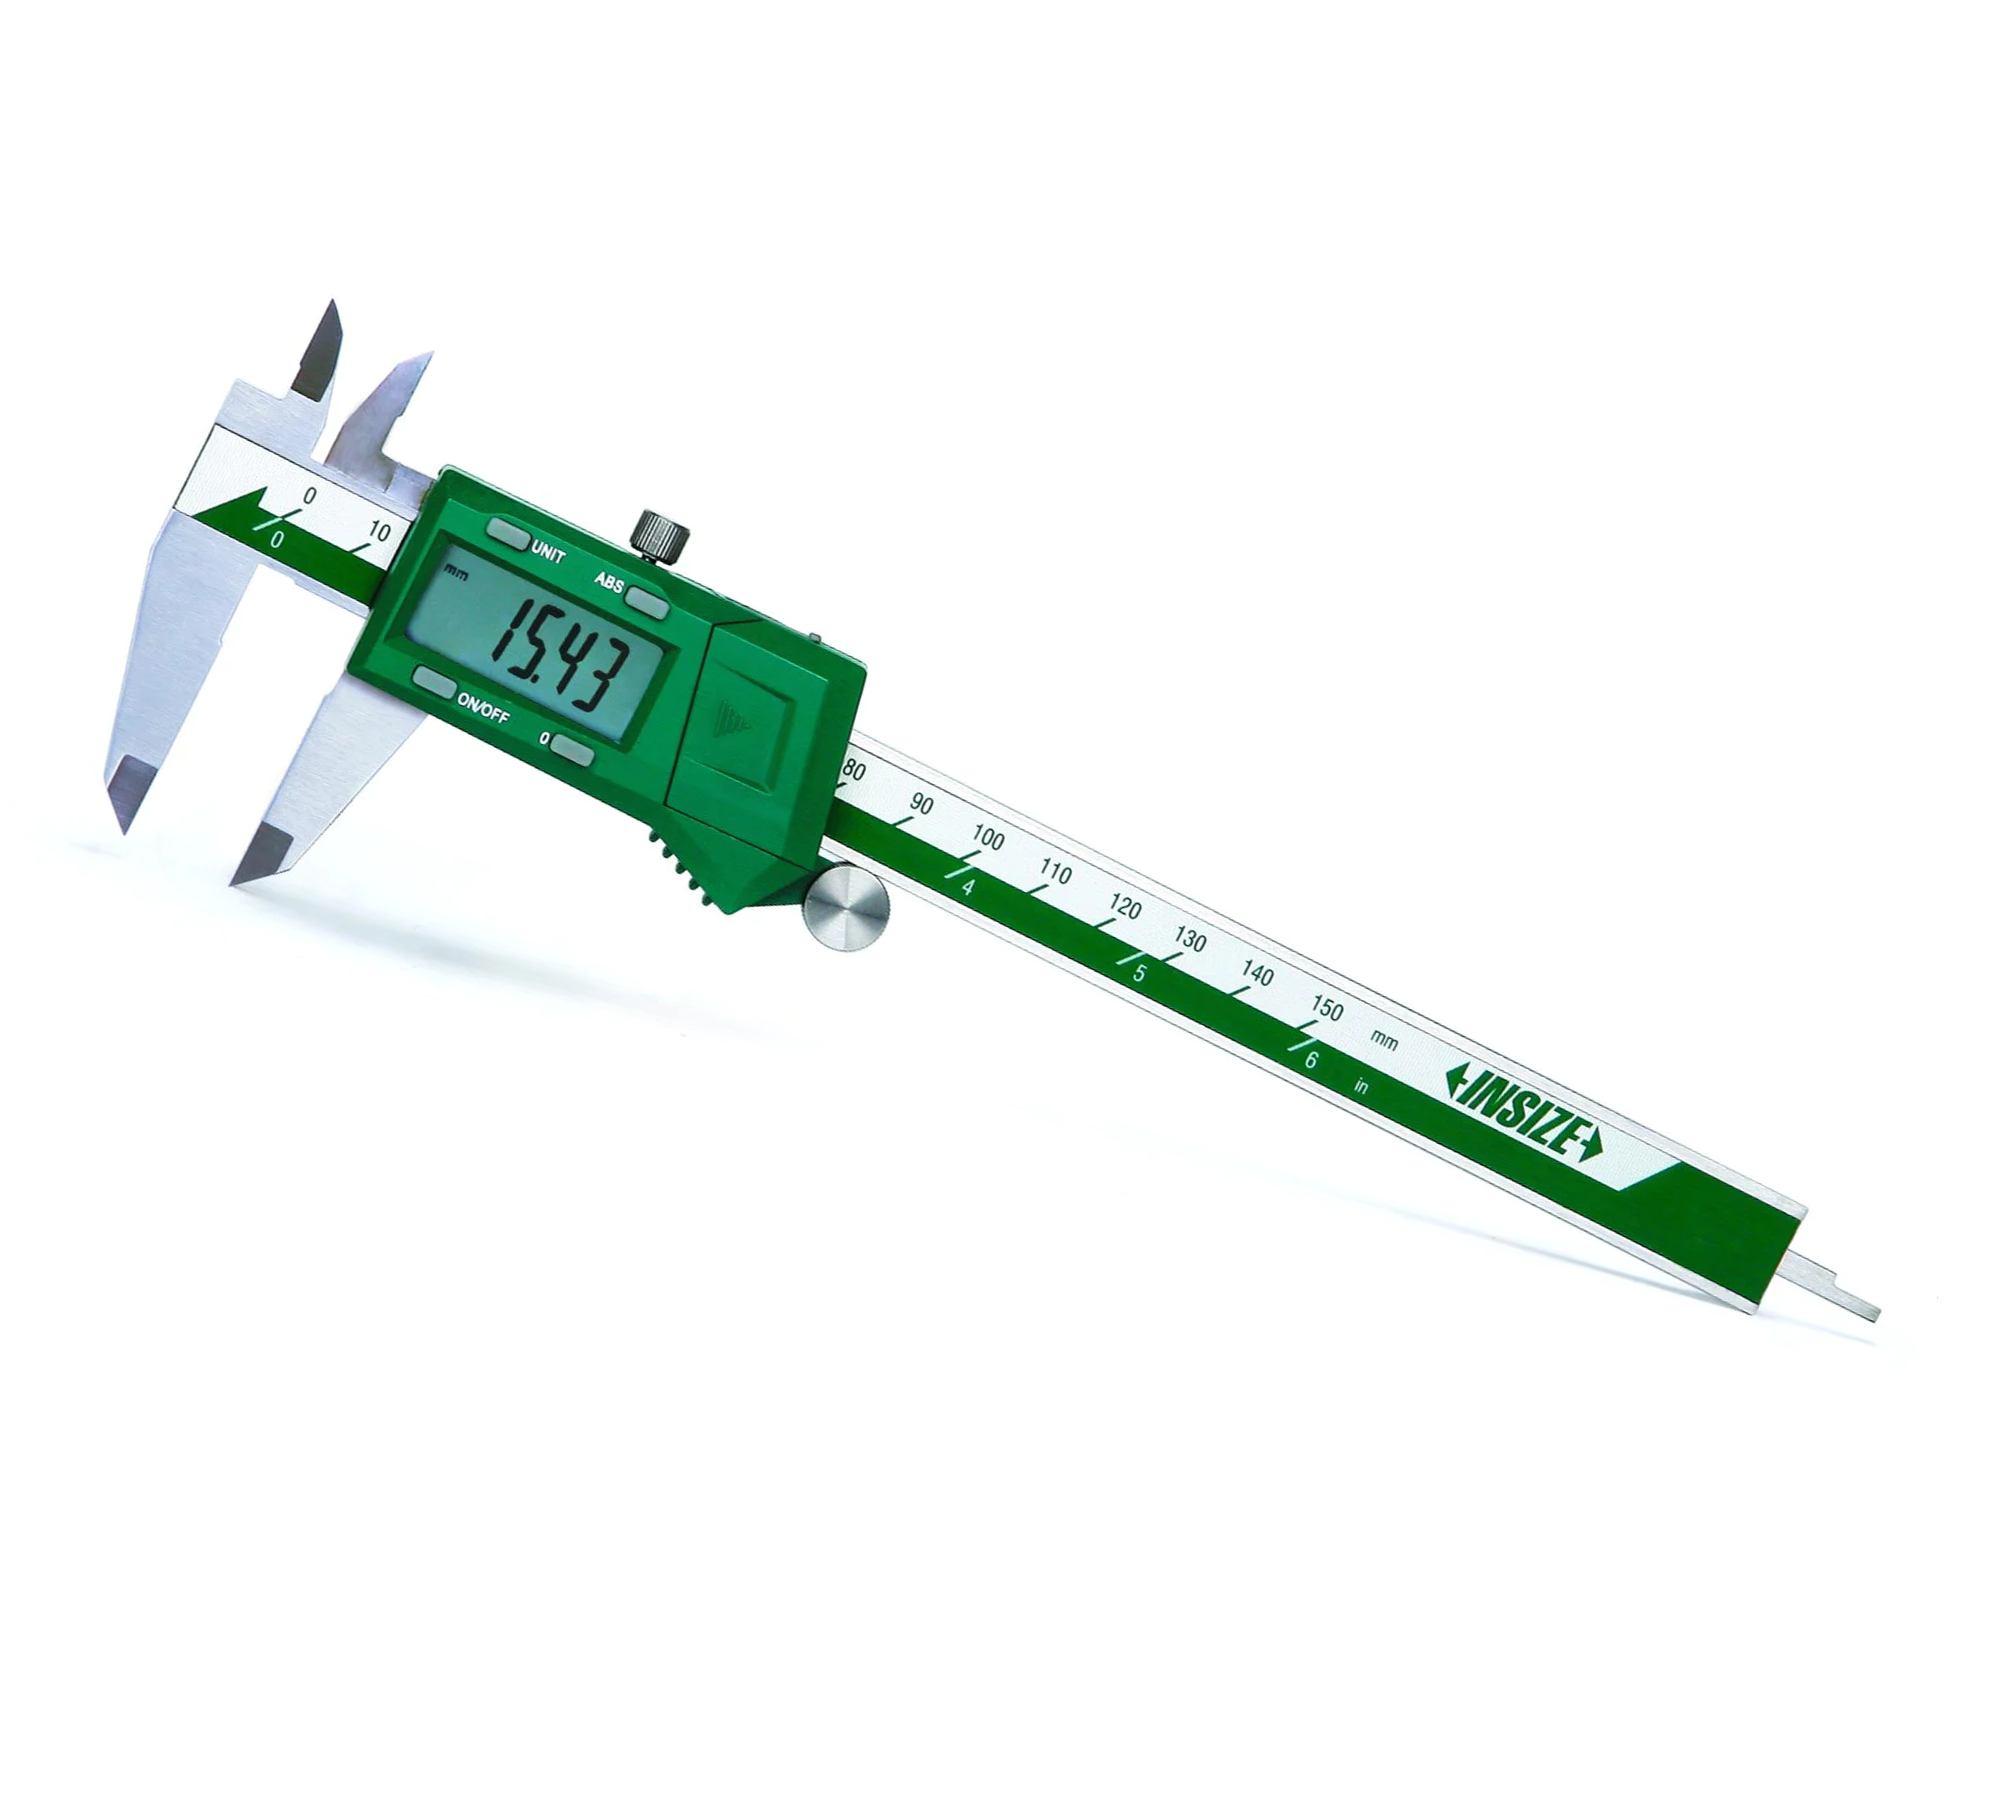 Shop for Digital Calipers Without SPC Output at GreatGages.com